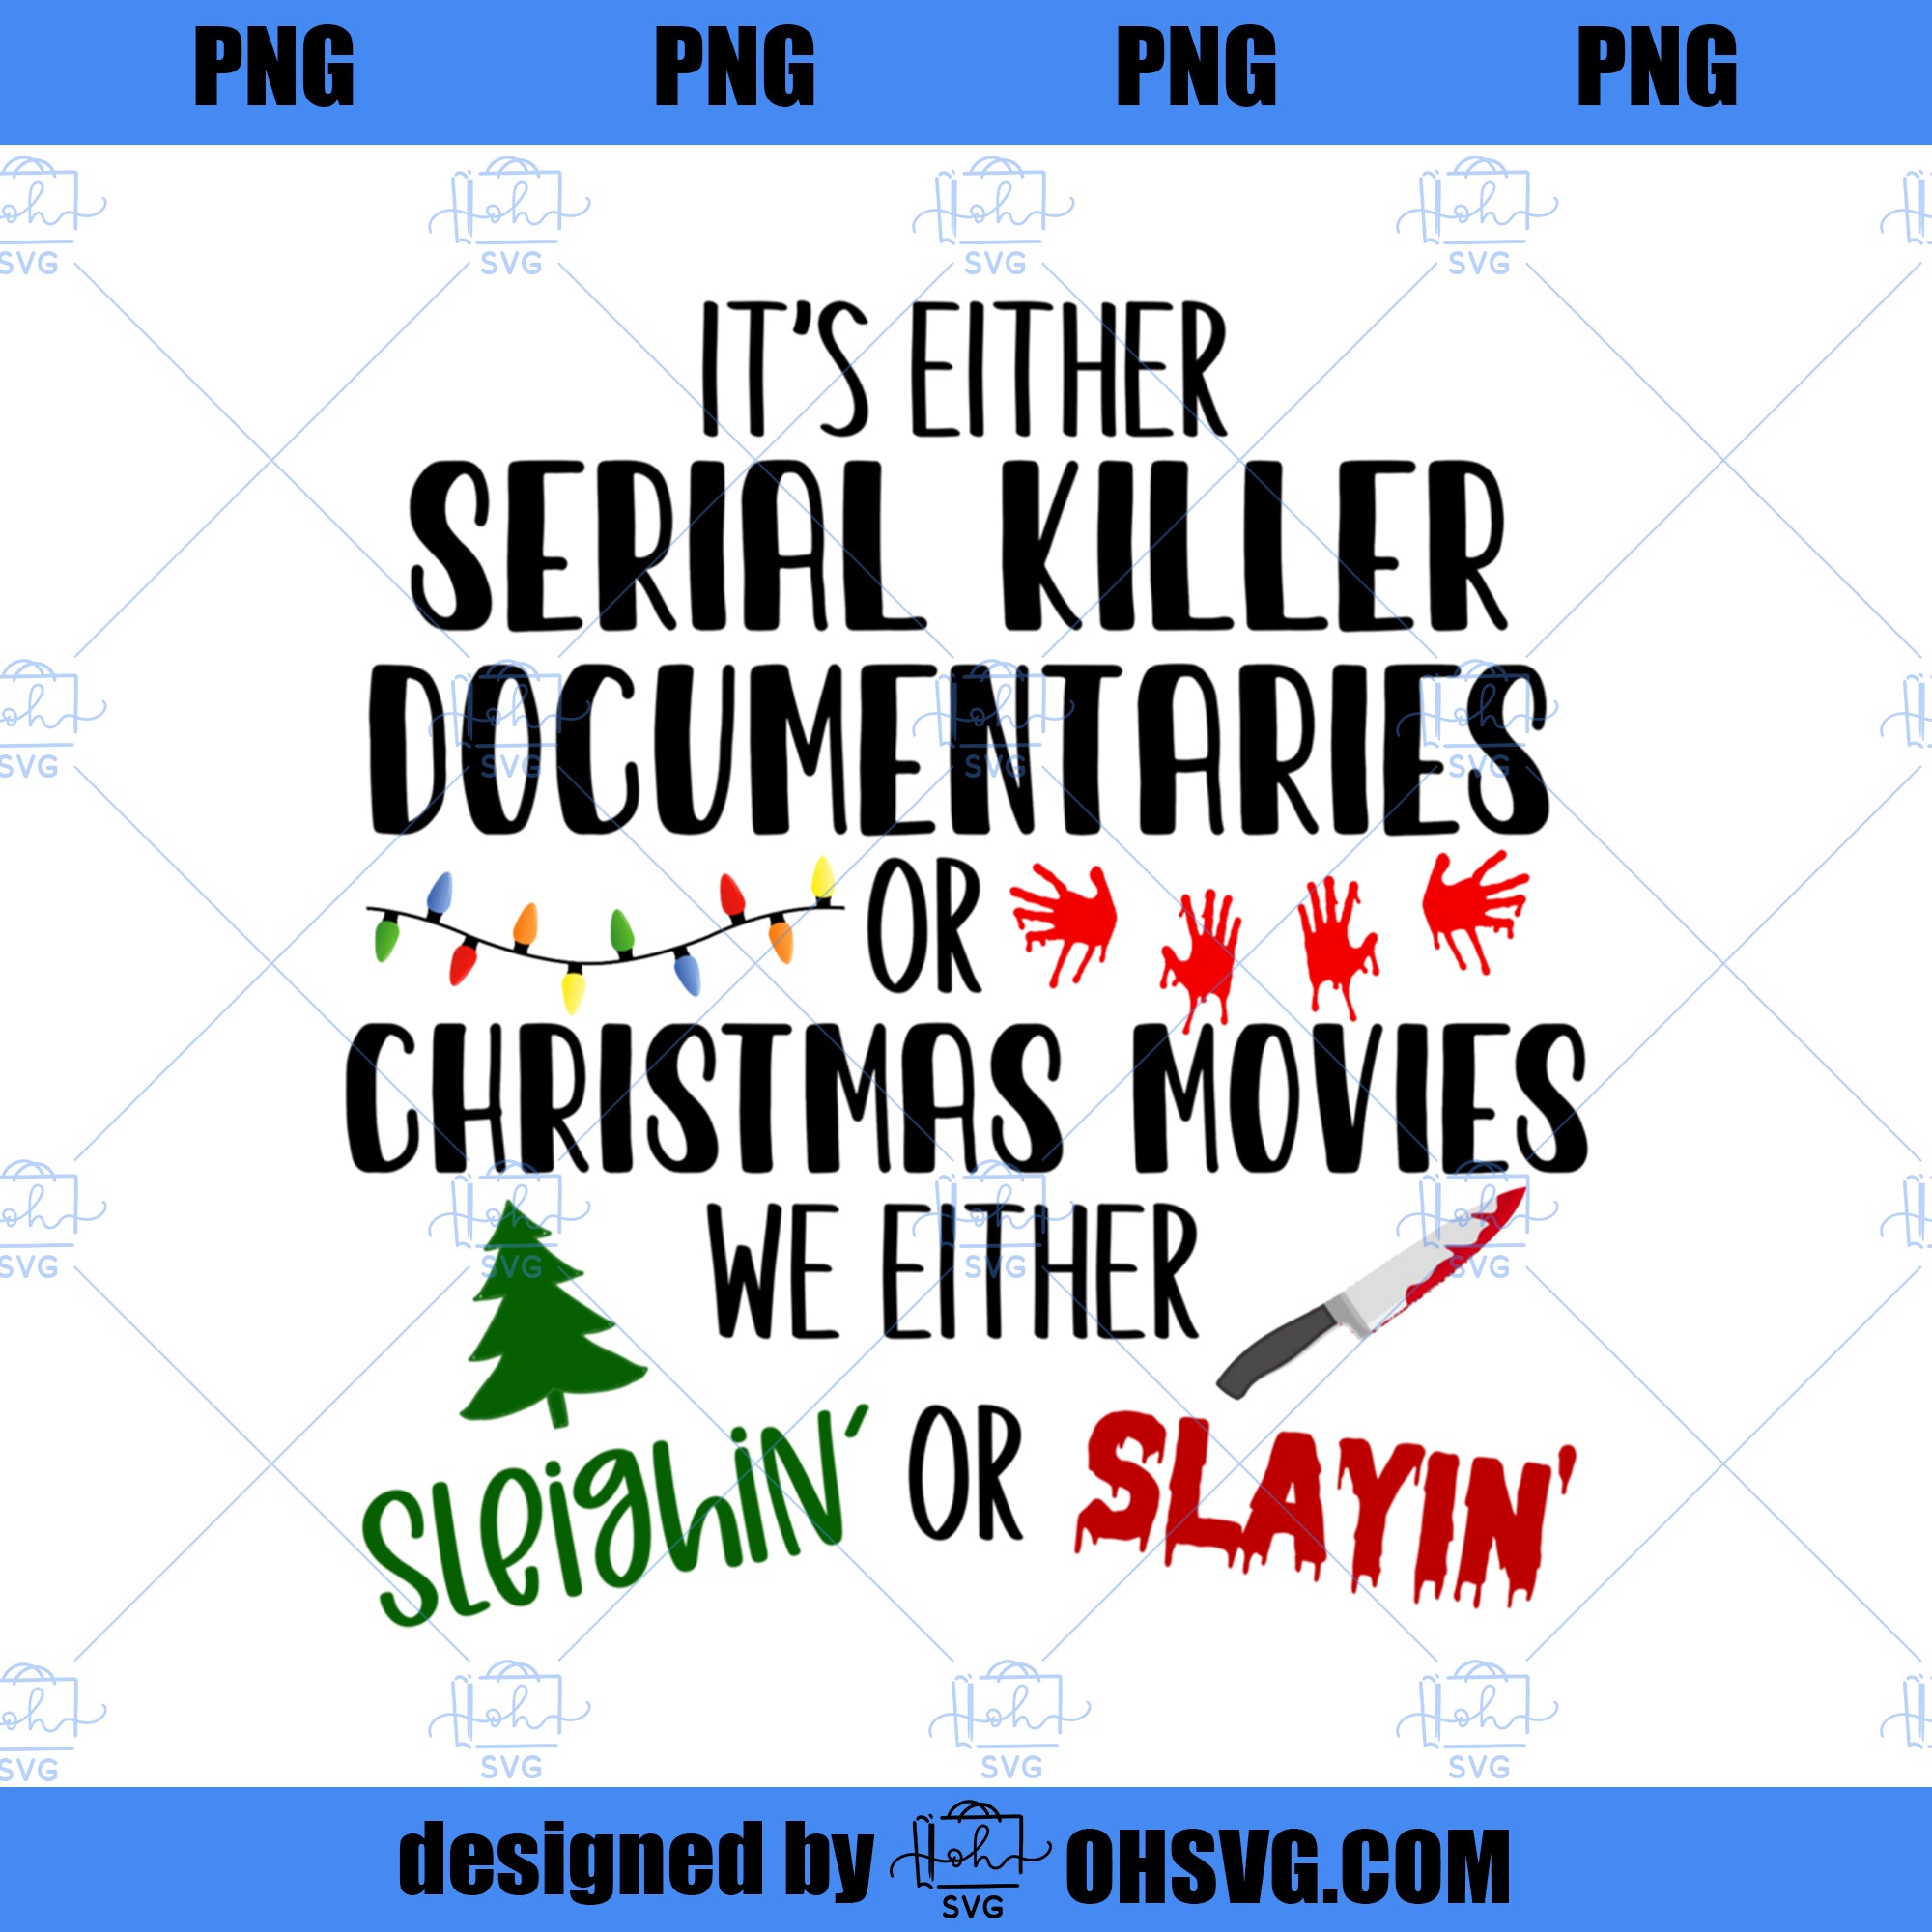 Its either serial killer documentaries or Christmas movies   PNG, Movies PNG, Christmas movies PNG